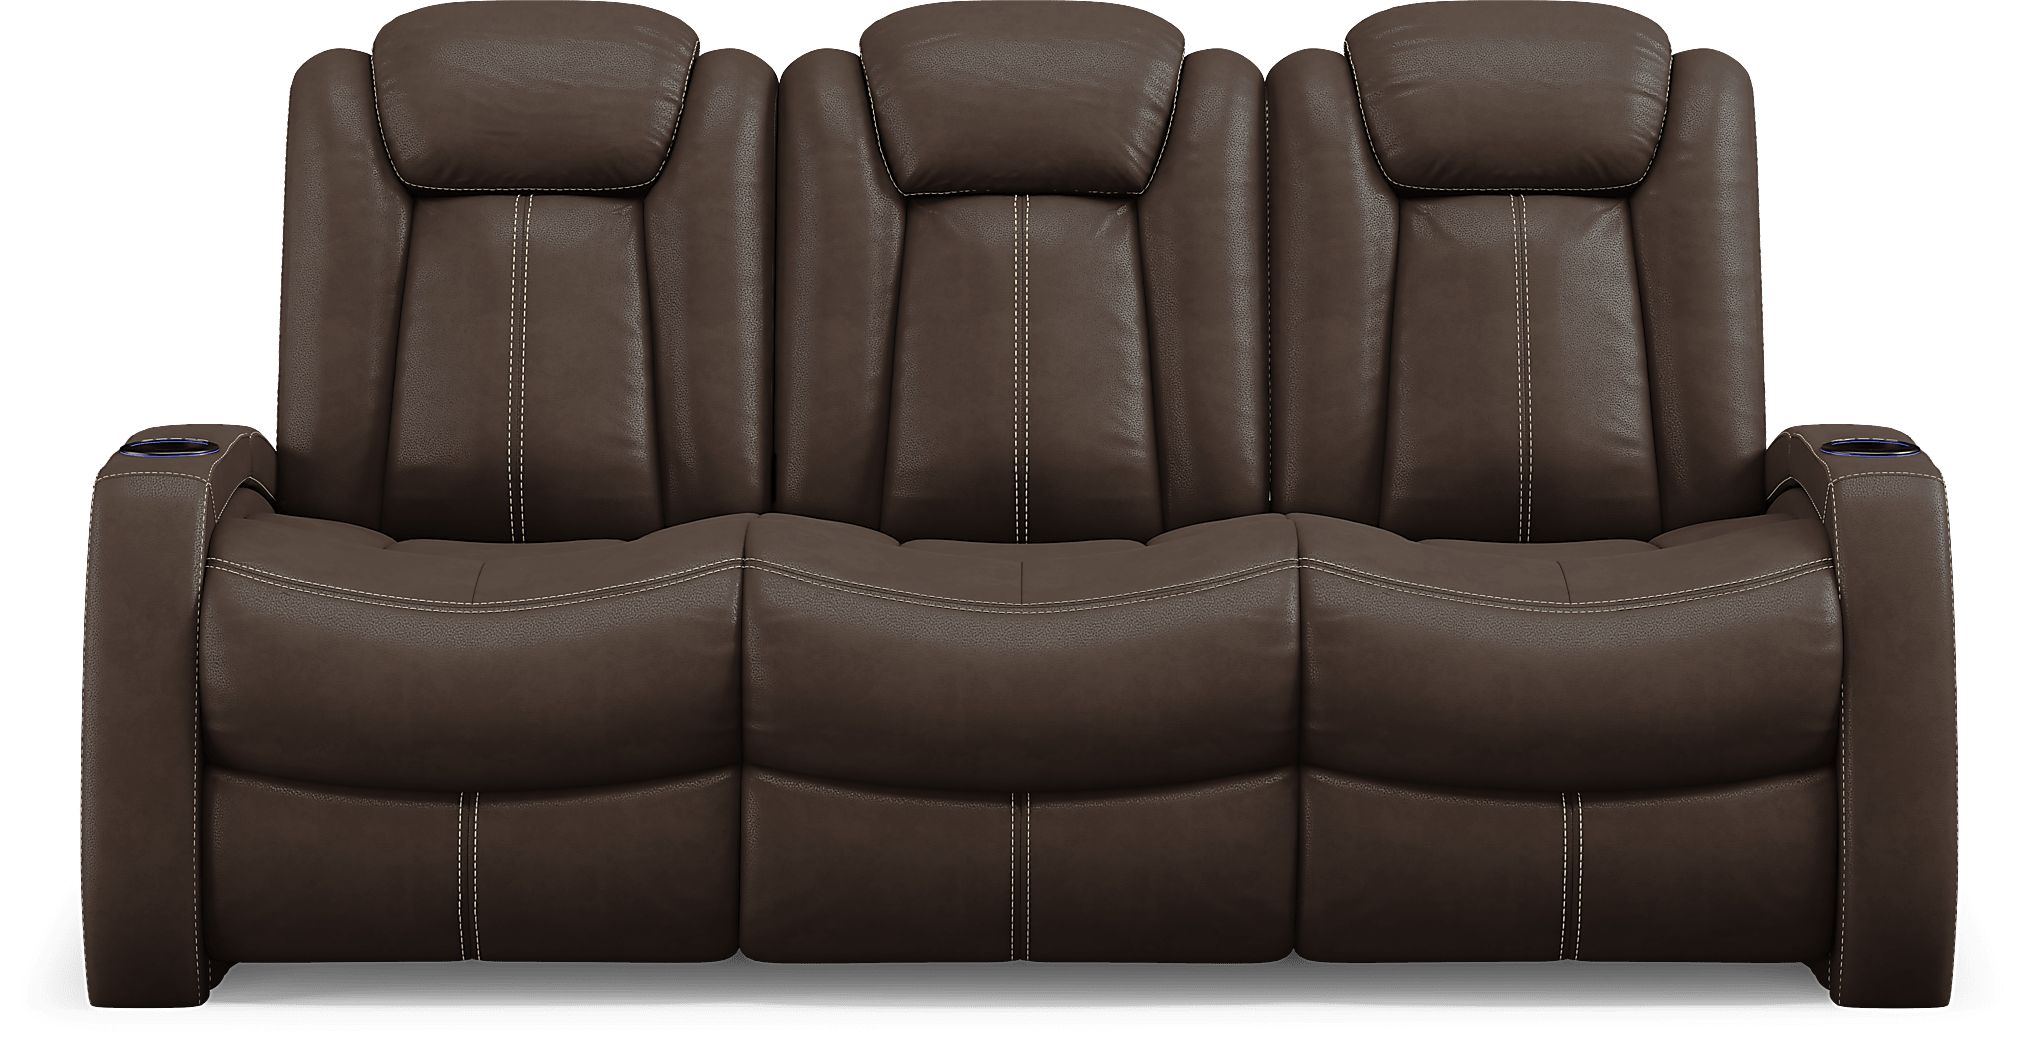 Crestline Brown 7 Pc Living Room with Dual Power Reclining Sofa